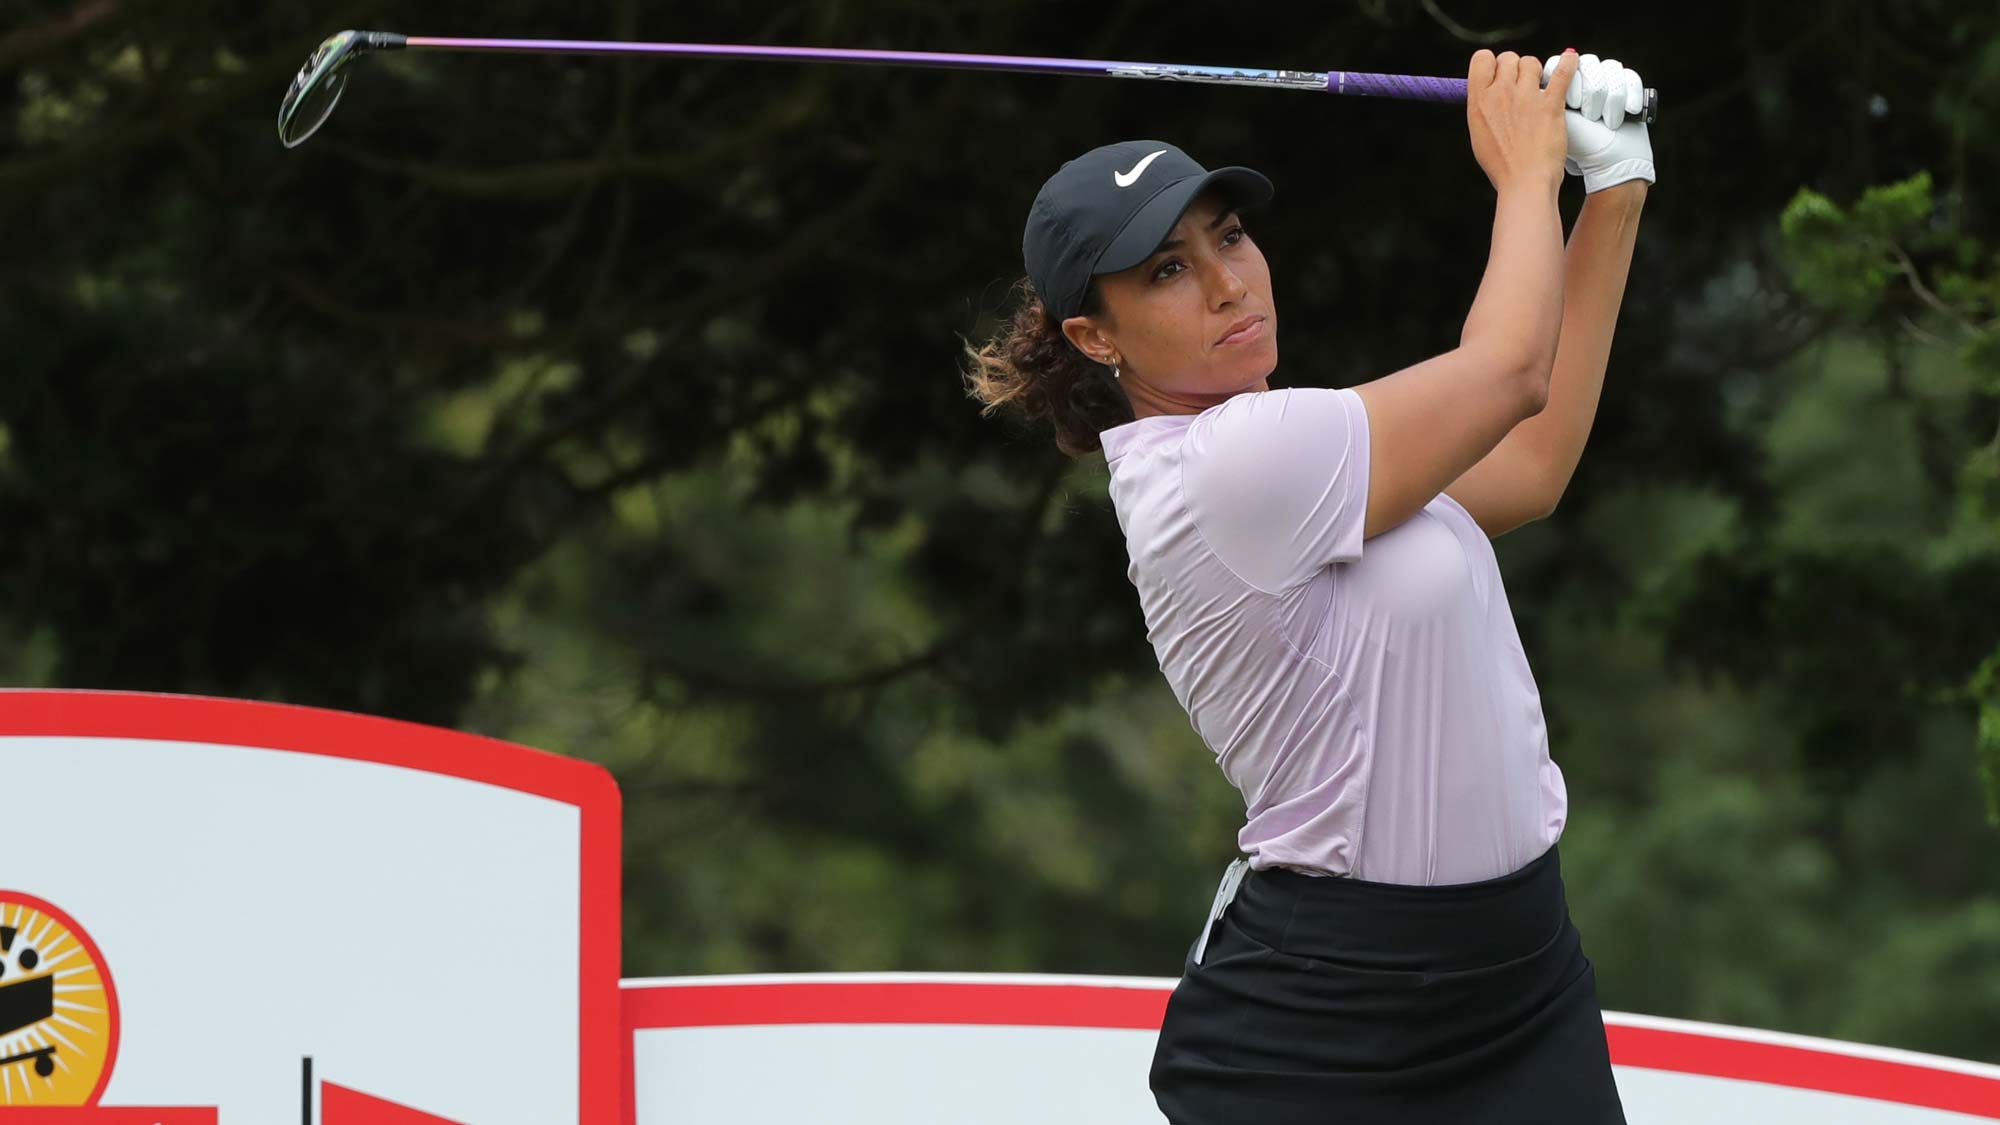 Cheyenne Woods hits her tee shot on the eighth hole during the first round of the ShopRite LPGA Classic presented by Acer